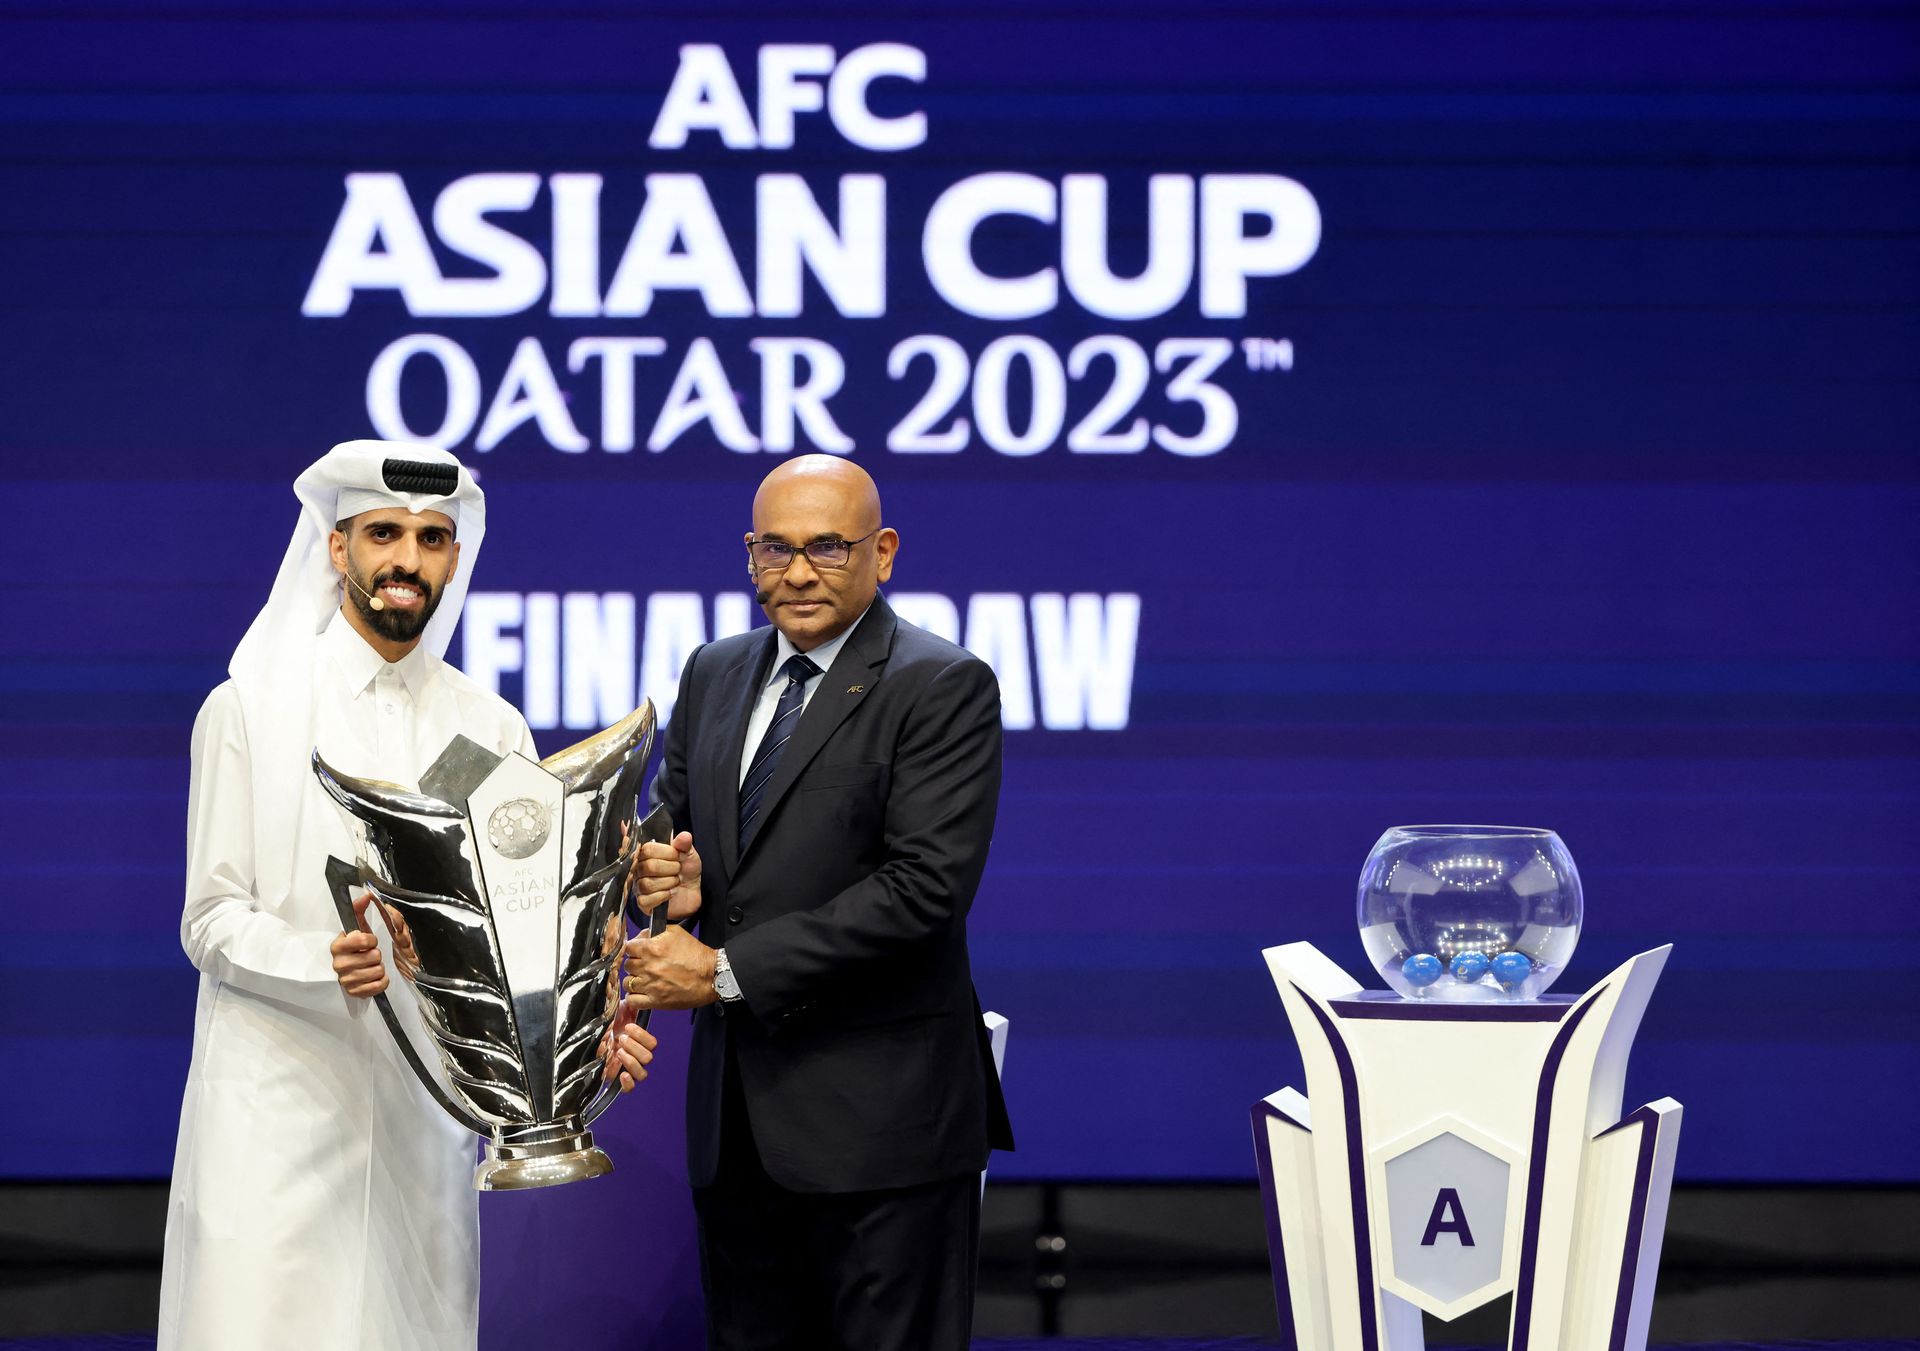 Vietnam in tough group with Indonesia, Iraq, Japan at 2023 Asian Cup